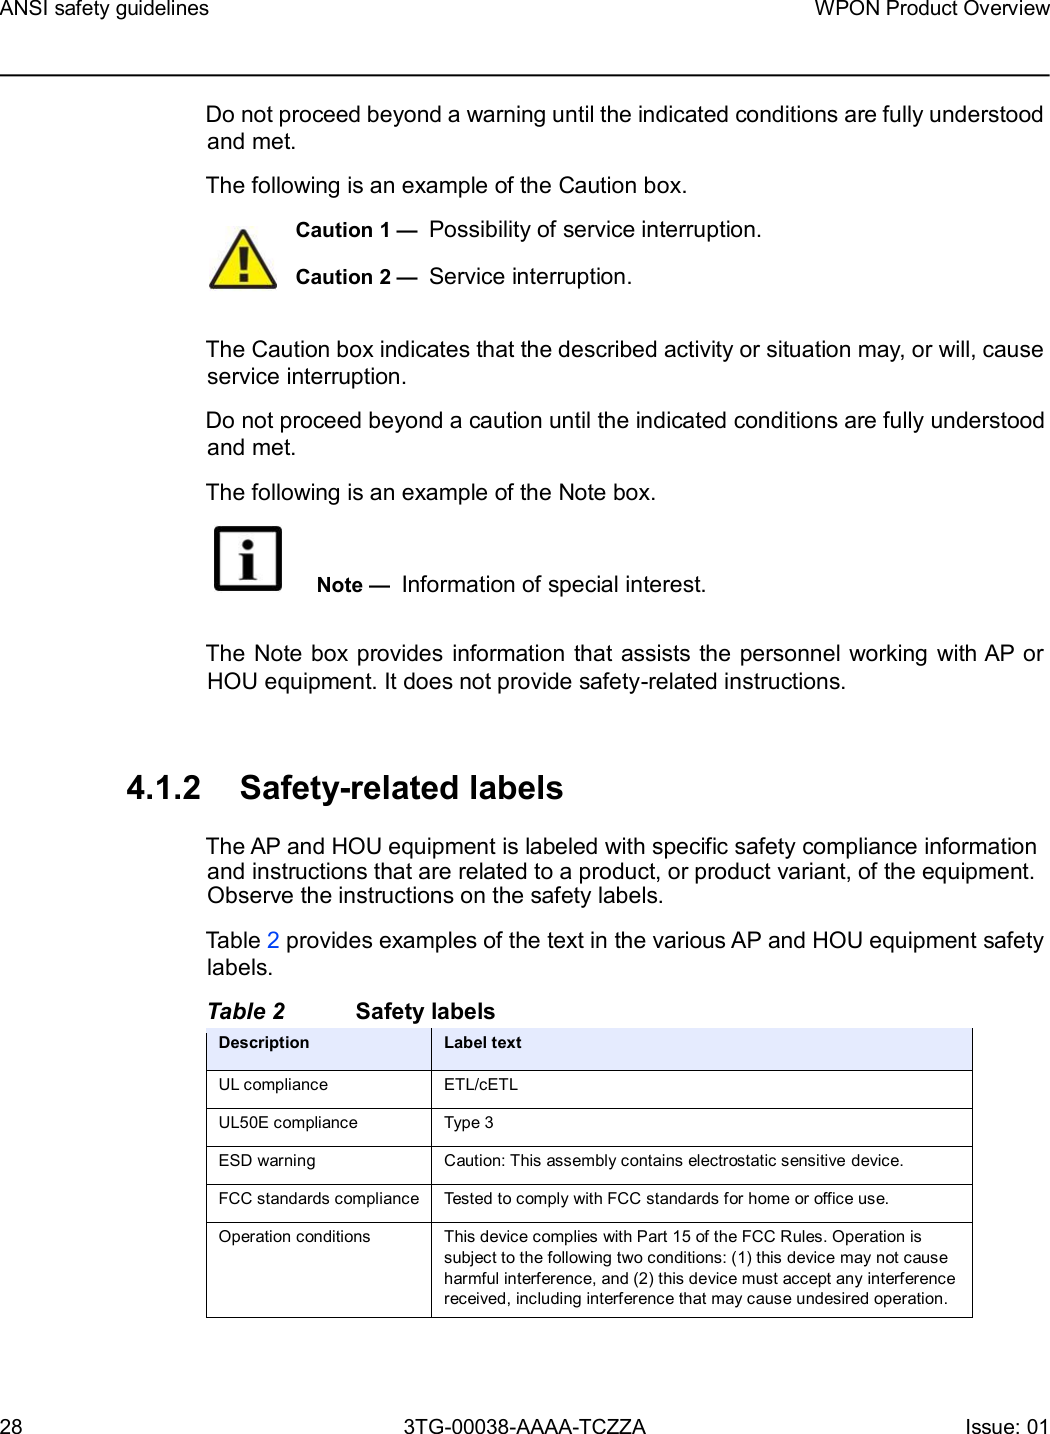 Page 28 of Nokia Bell 7577WPONAPDC WPON User Manual WPON Product Overview